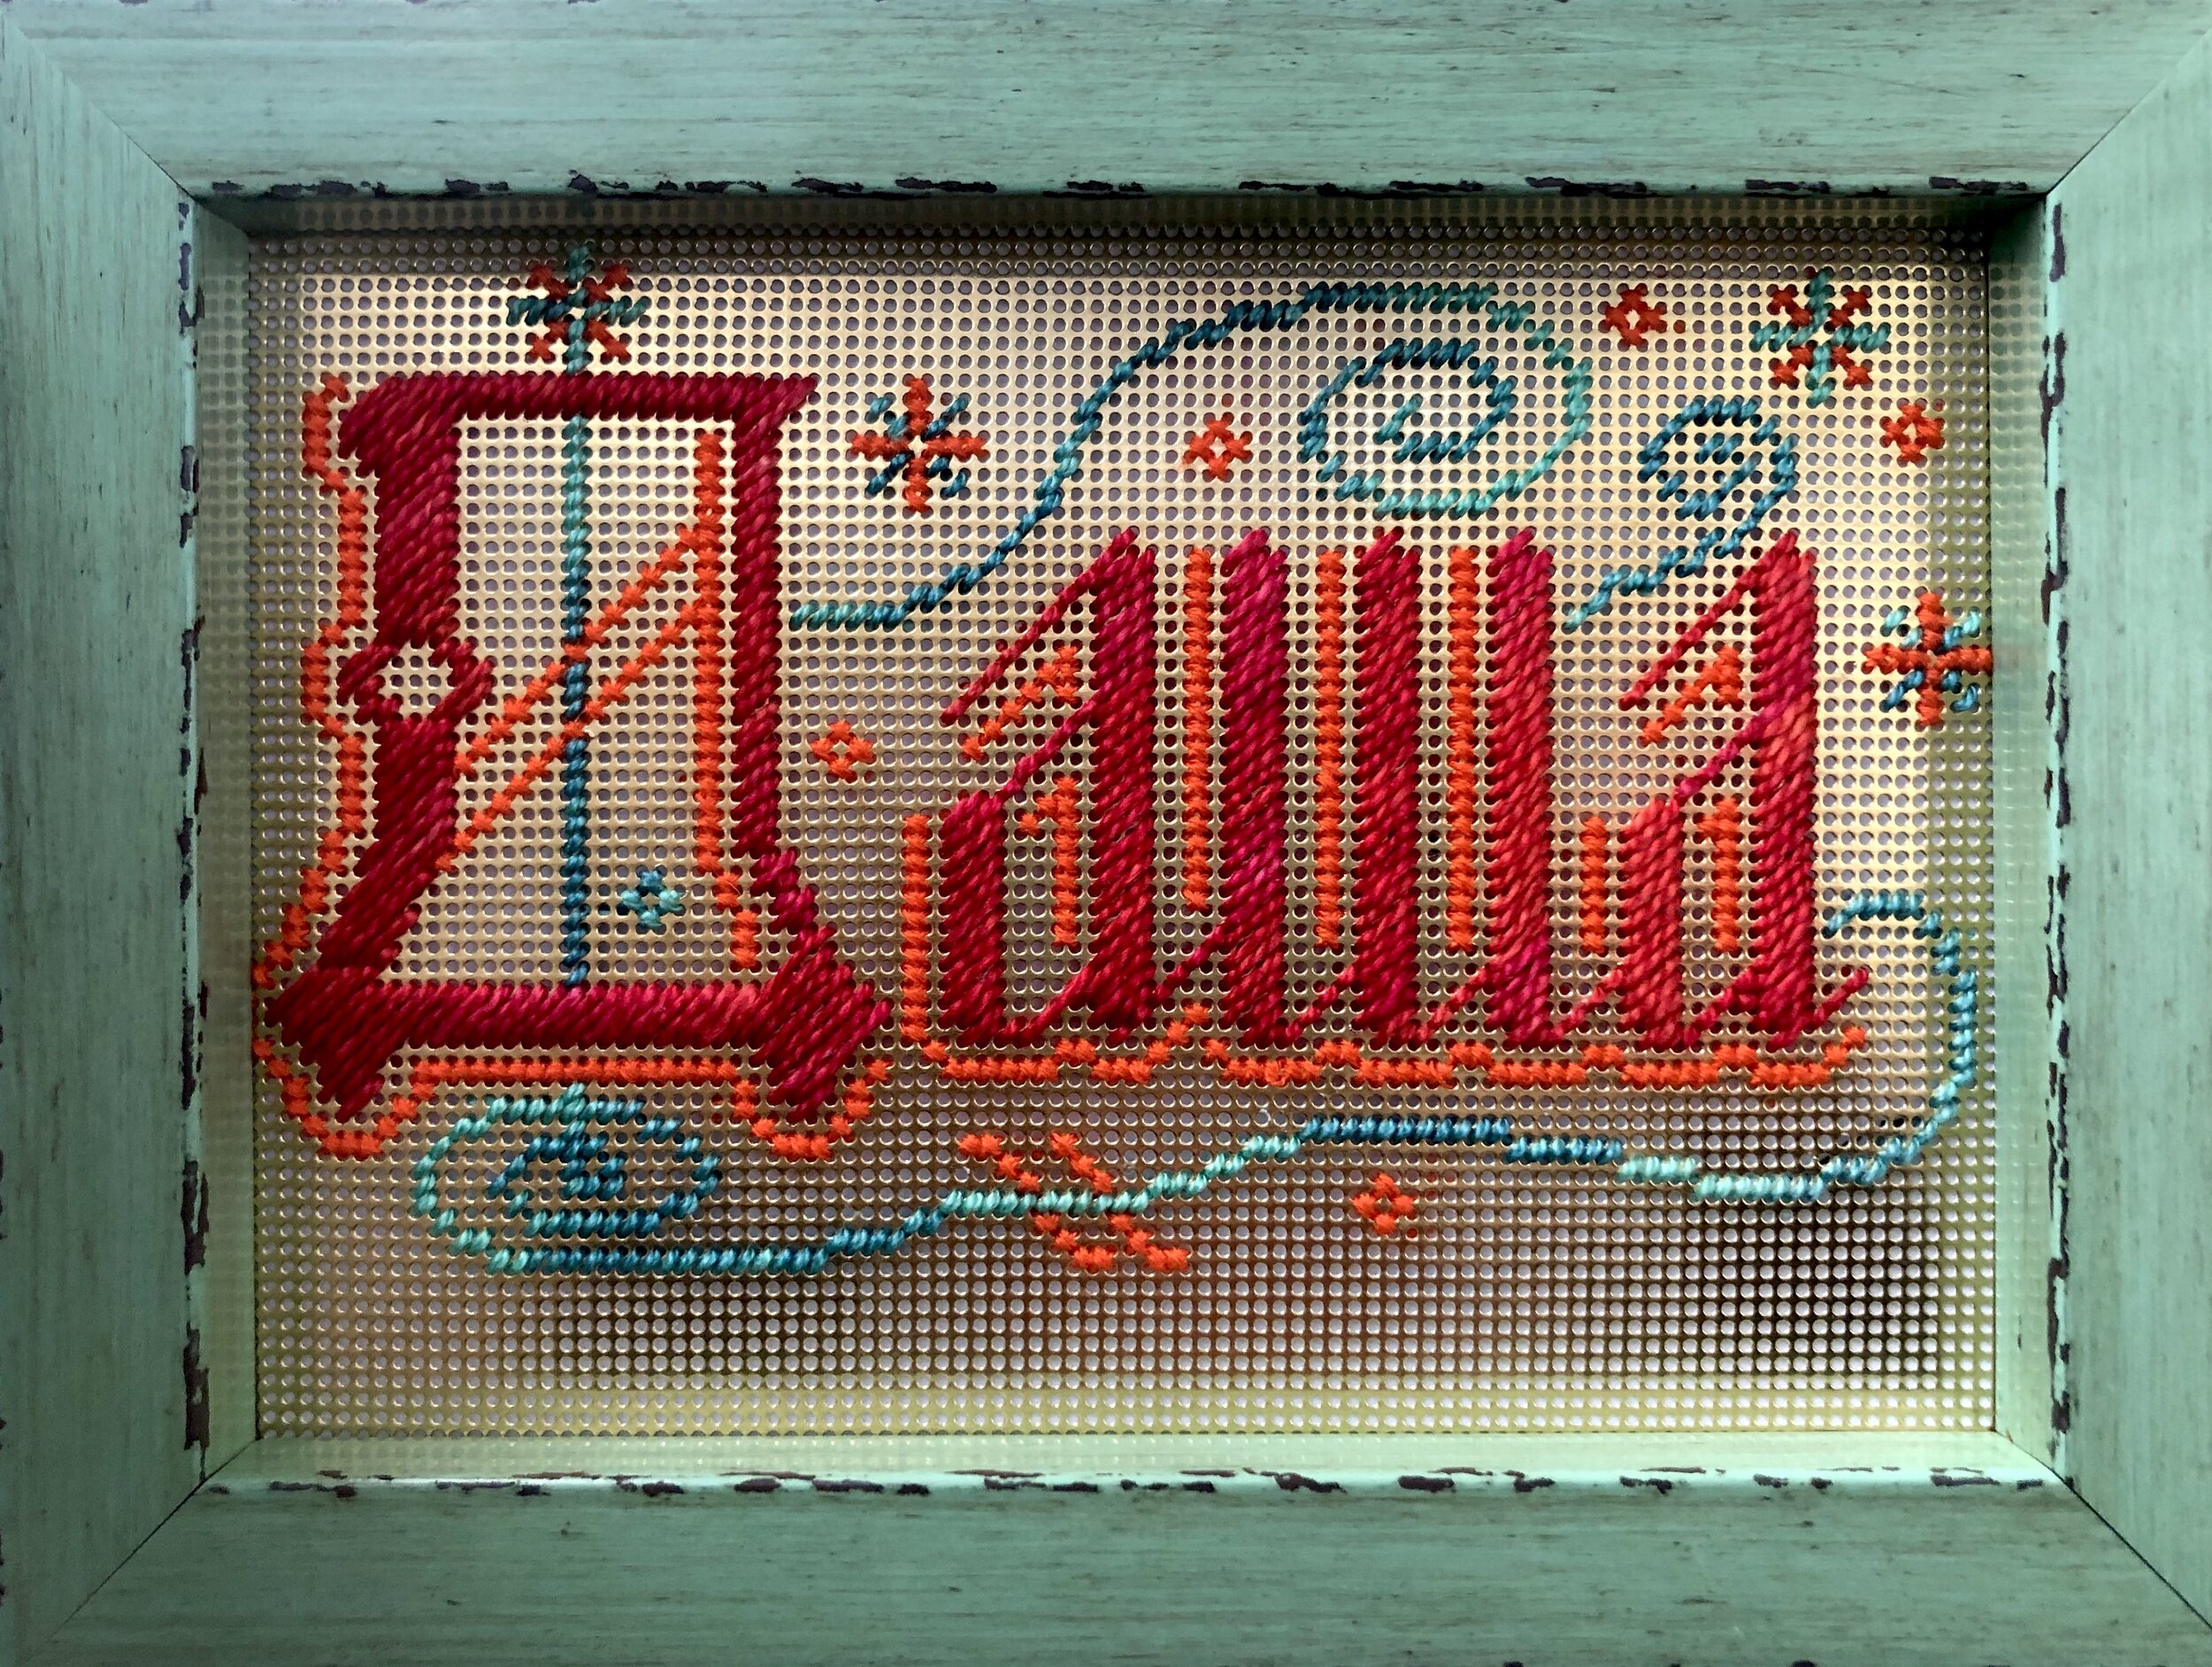   Dasha , 2019. Cotton on perforated paper. 5” x 7”. Long and cross stitch motto modeled on historical Victorian motto samplers. 